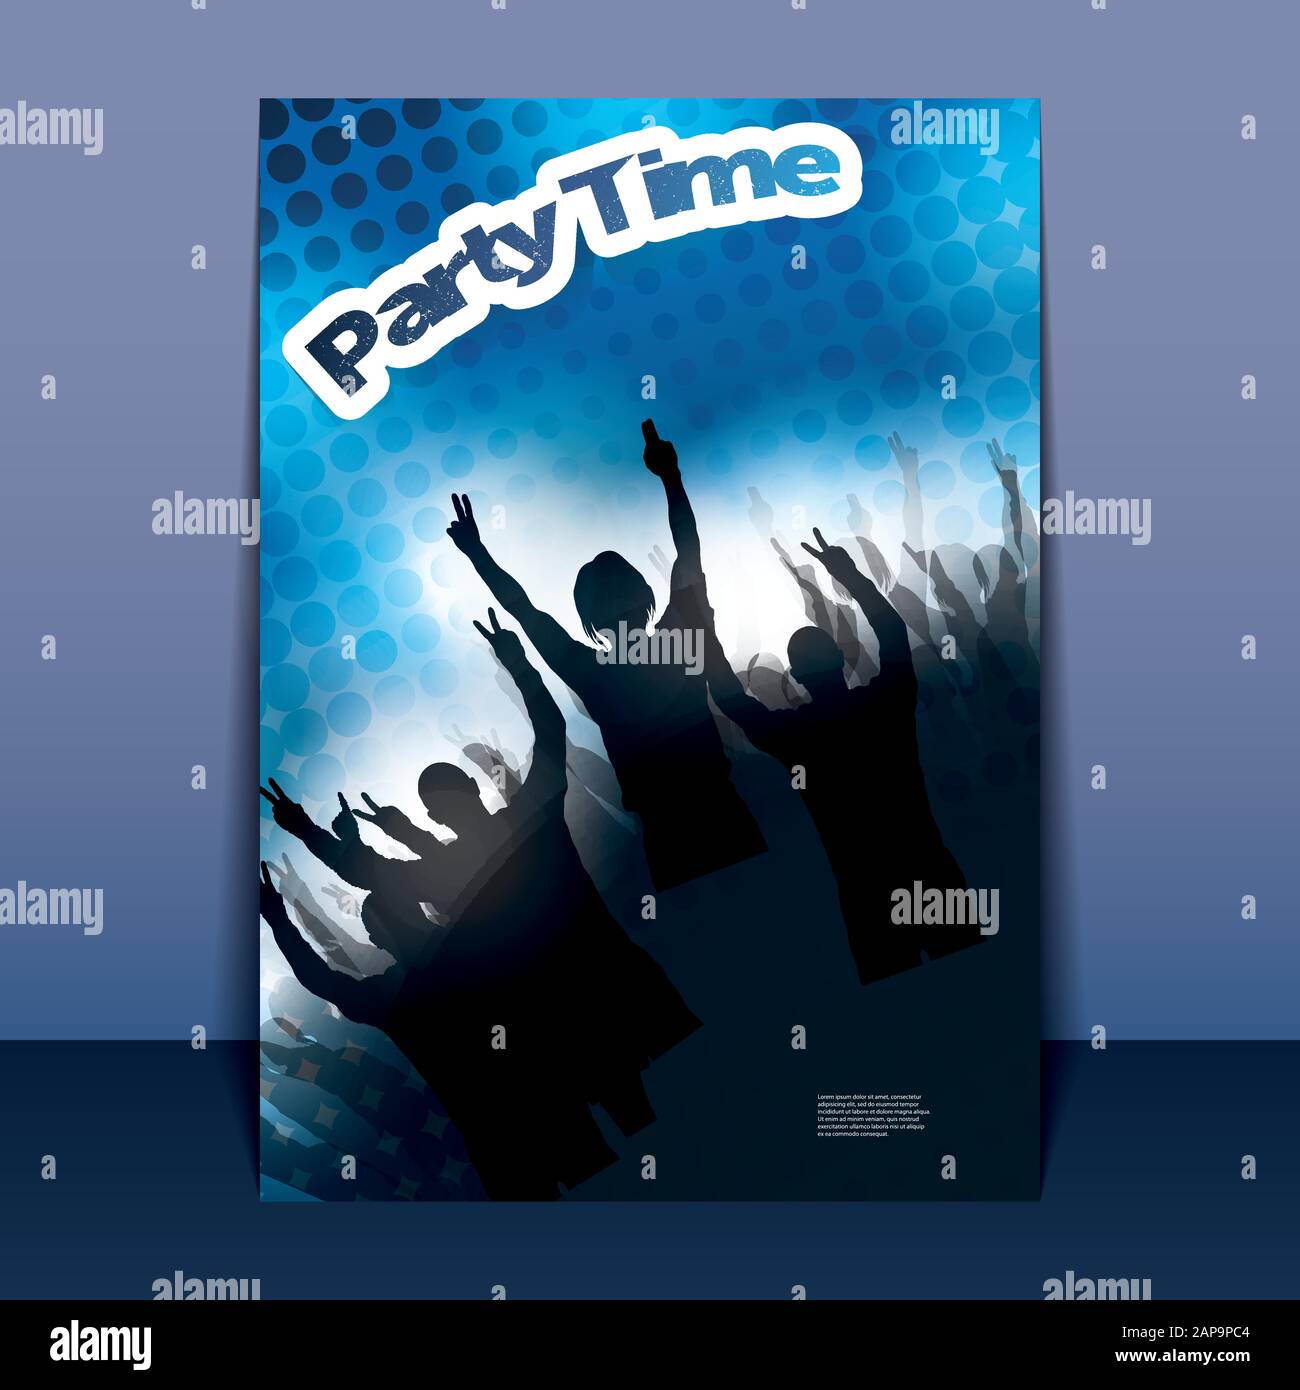 Flyer or Cover Design - Party Time - Poster with Spotted Background  with Dancing Crowd, People in the Dark, Silhouettes with Waving Hands Vector Stock Vector